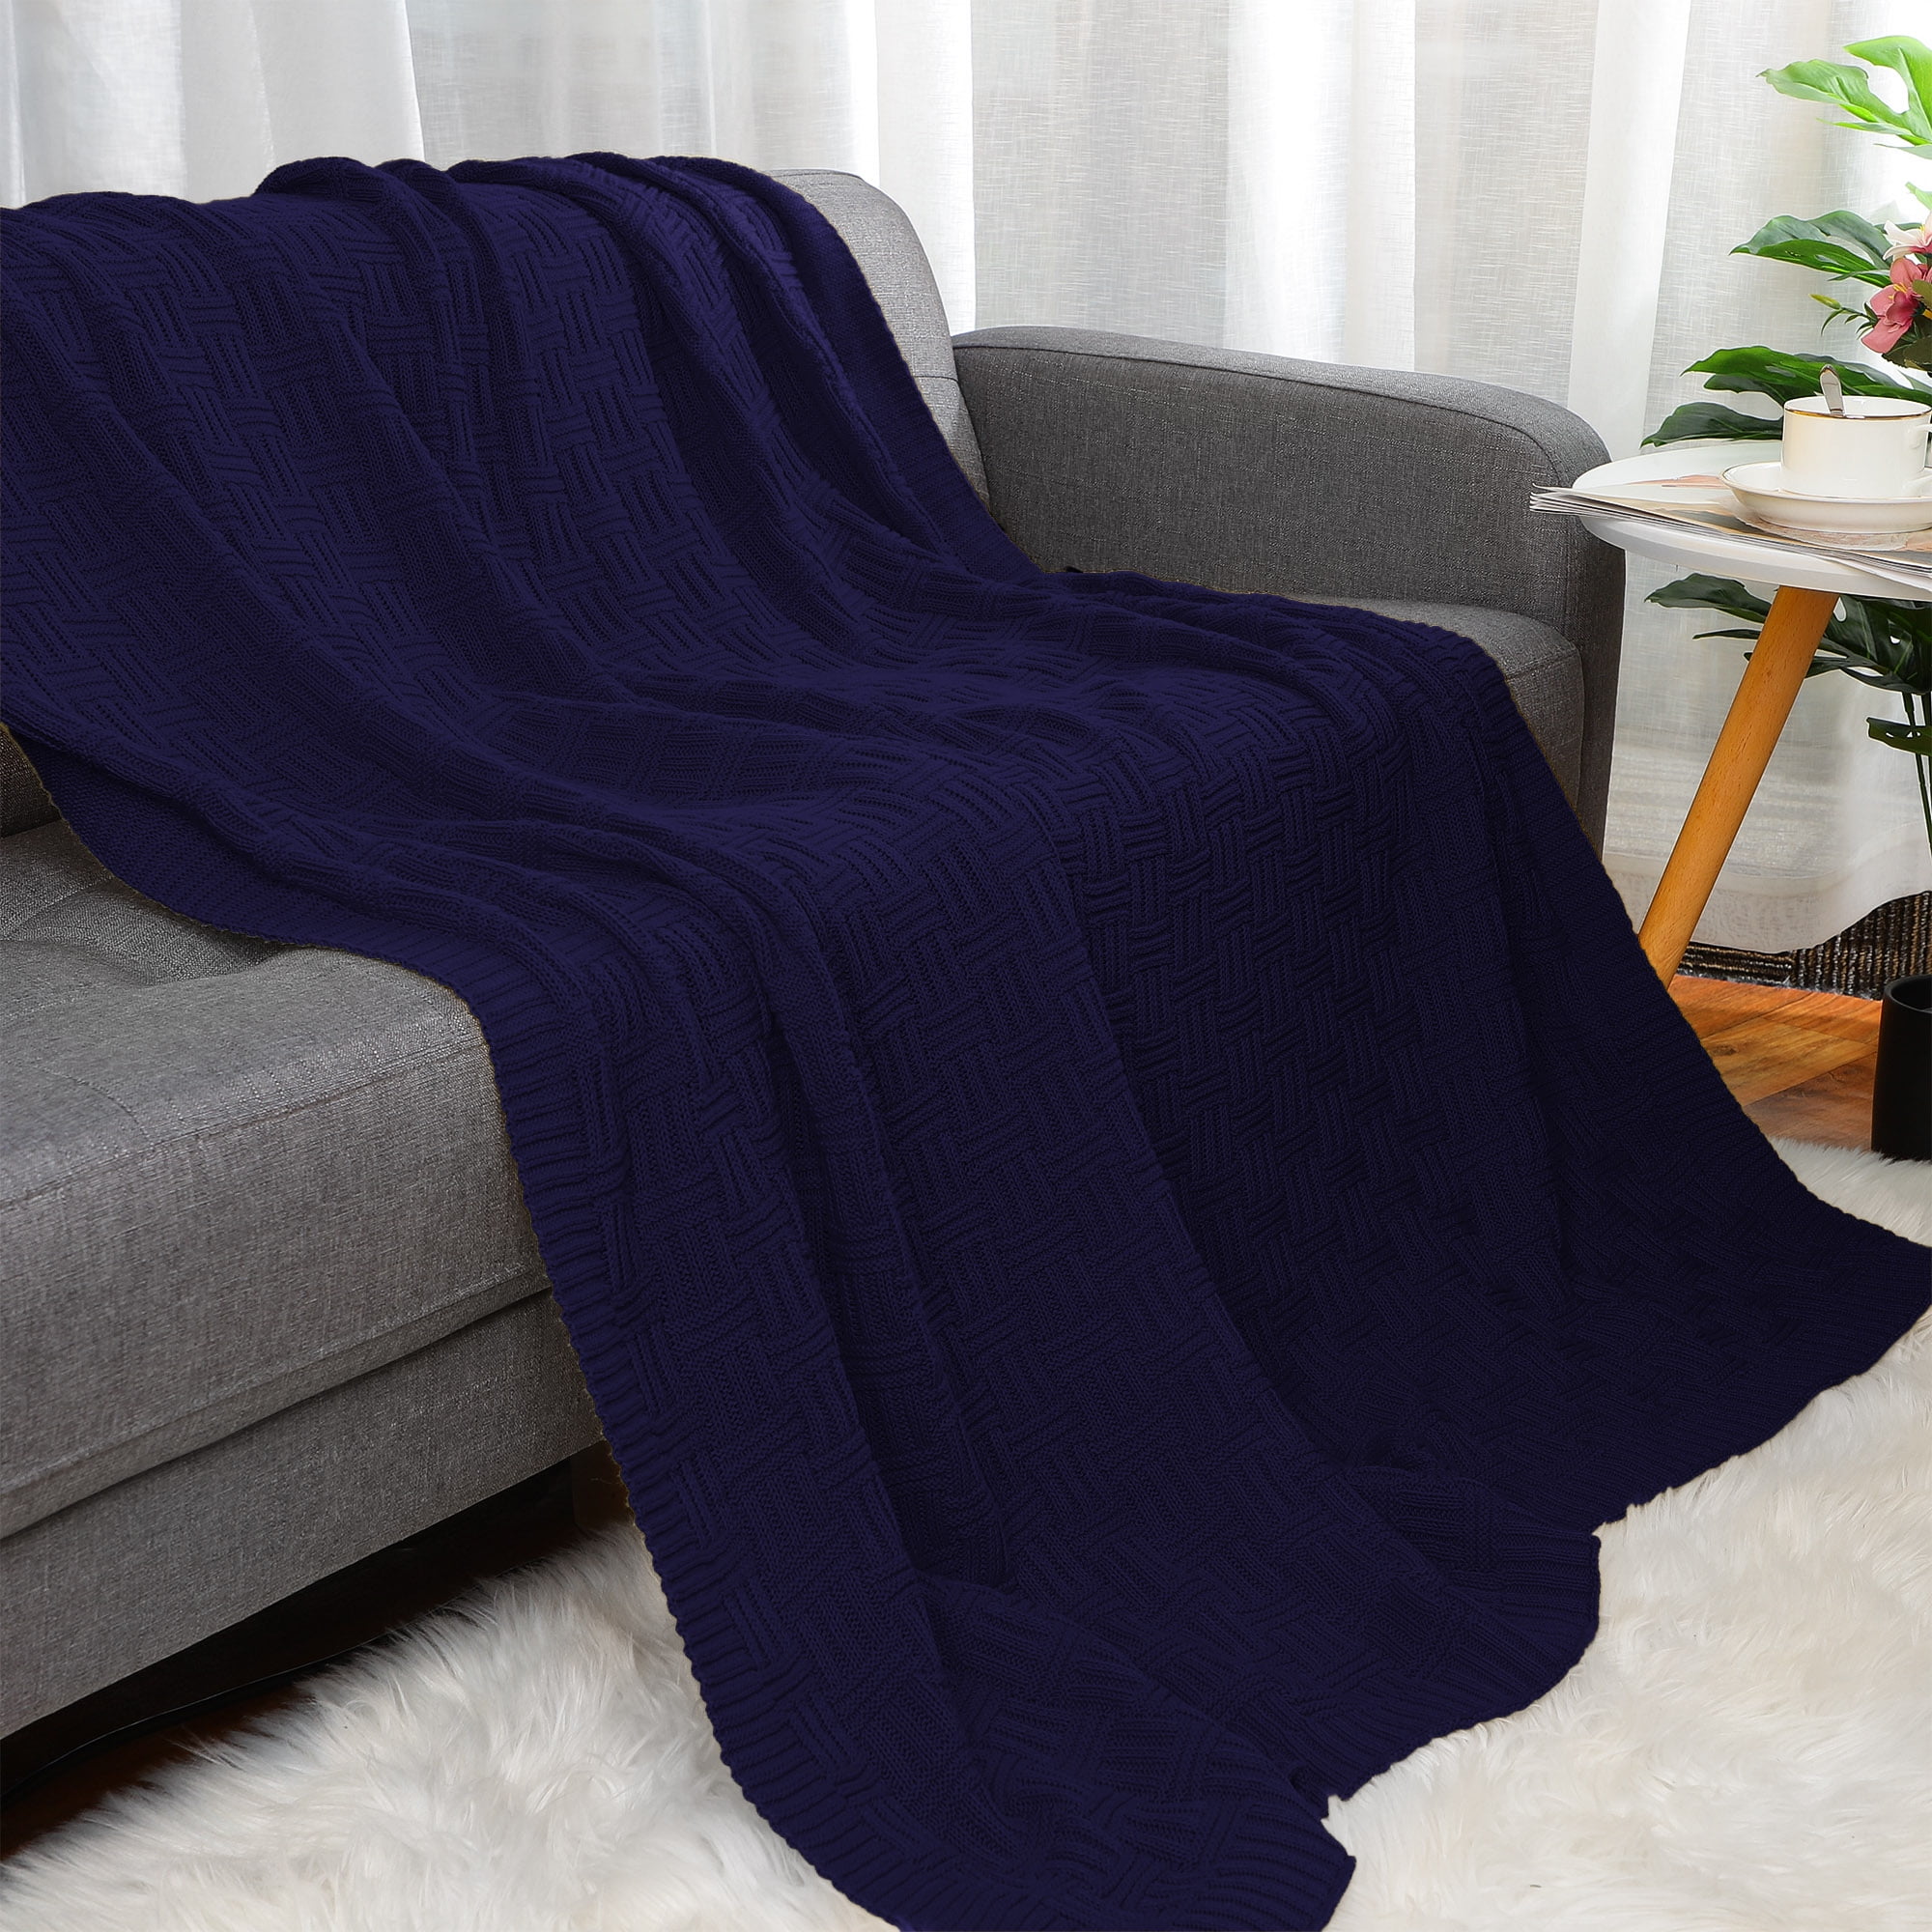 Knitted blanket home decor throw W870 blue